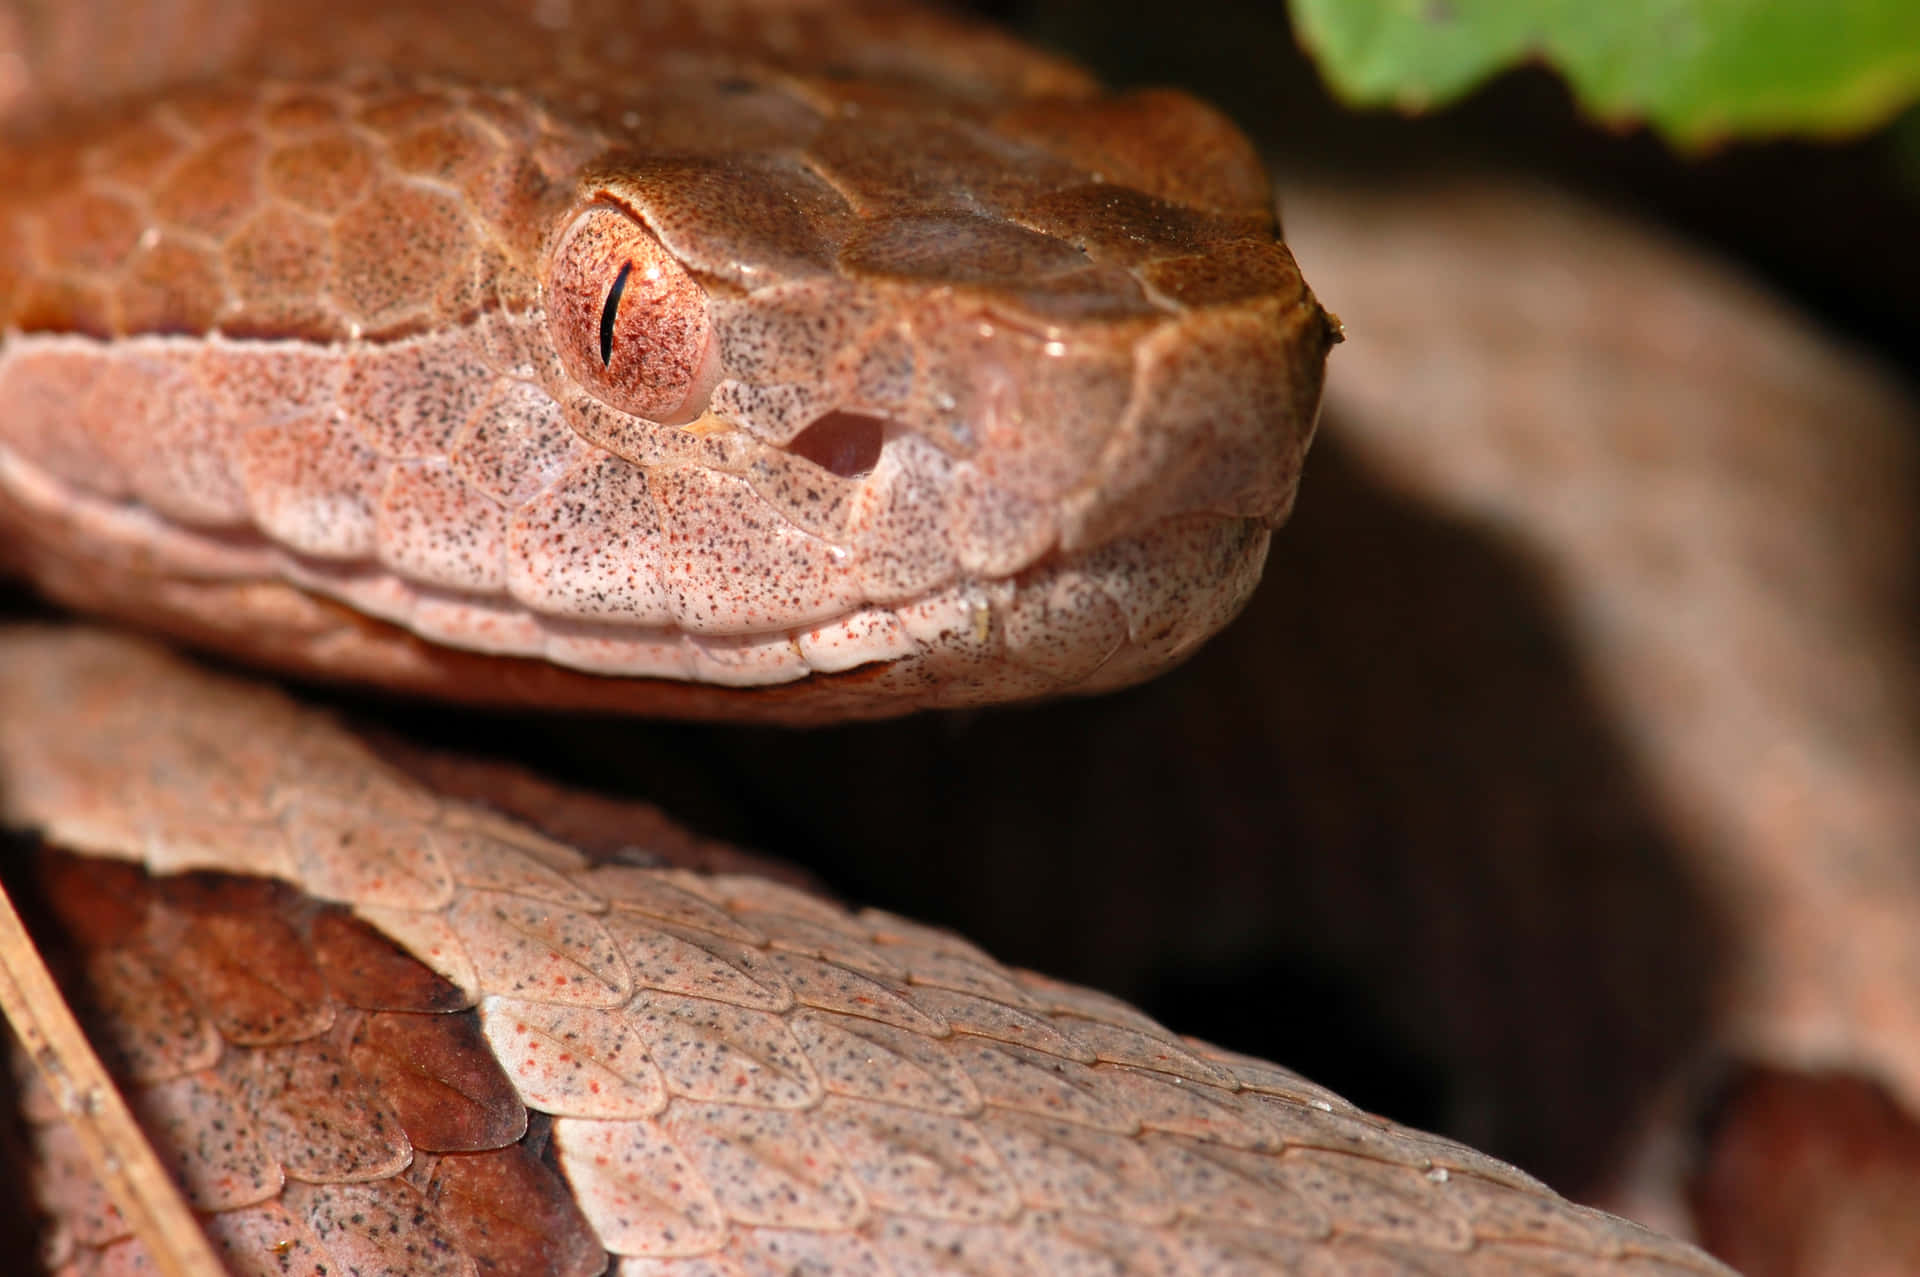 "Copperhead Snake Crawling on a Rocky Surface"